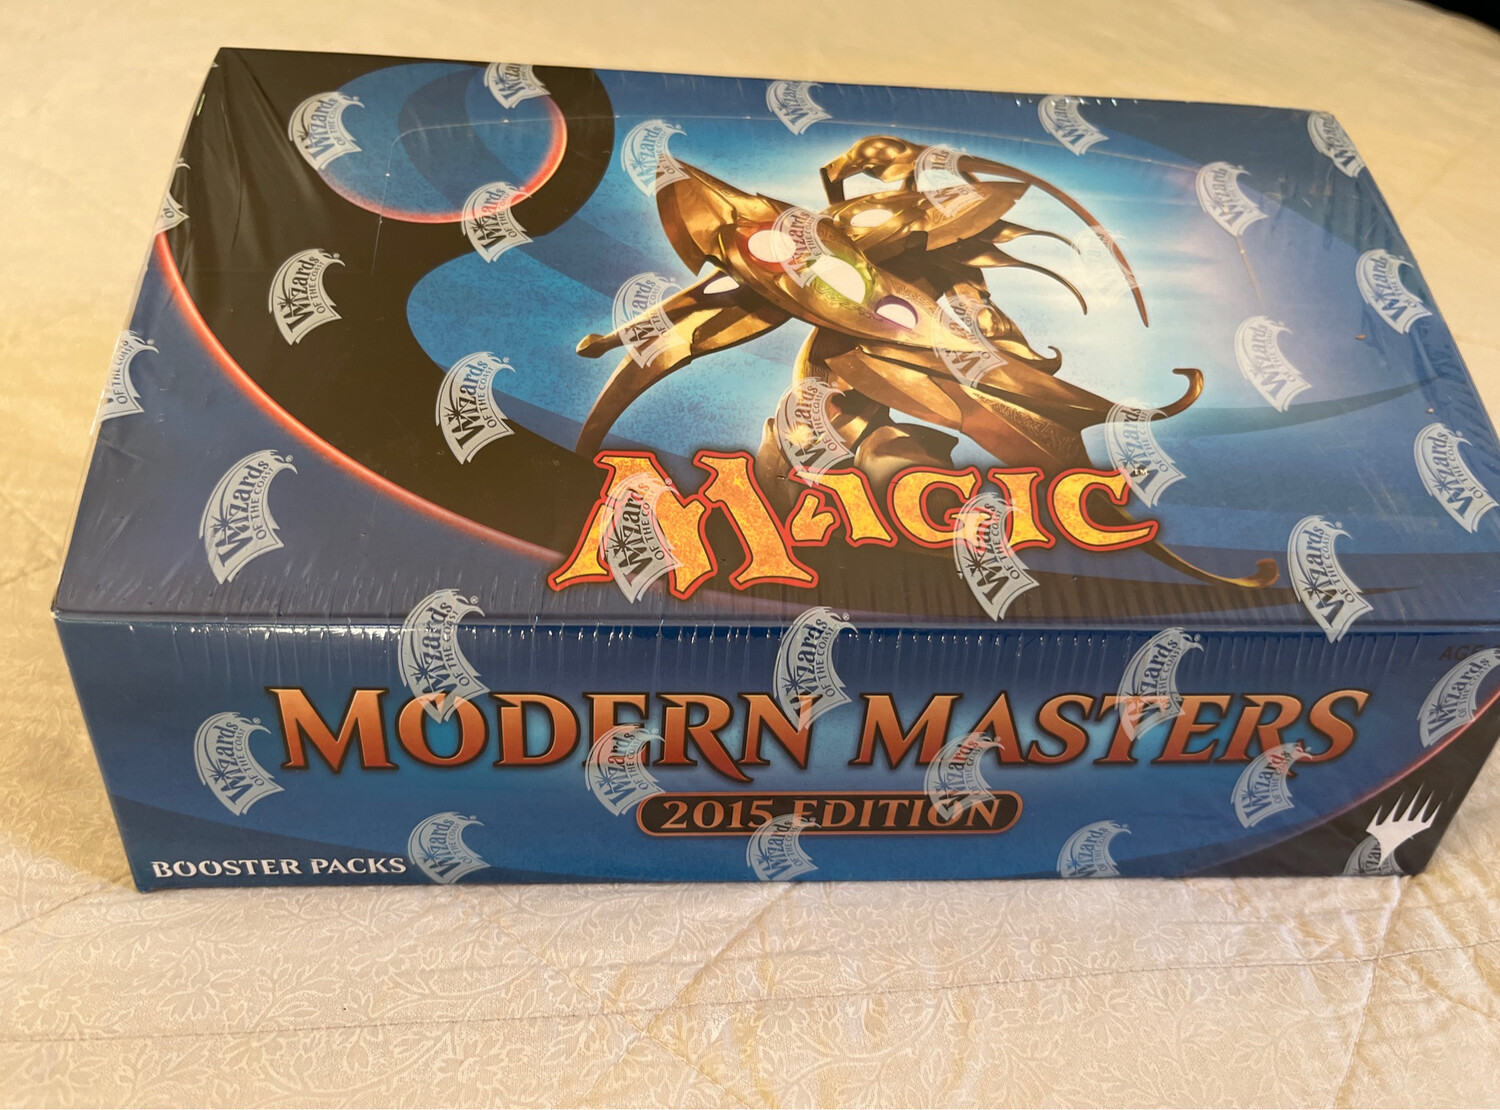 Modern Masters 2015 Edition Booster Display